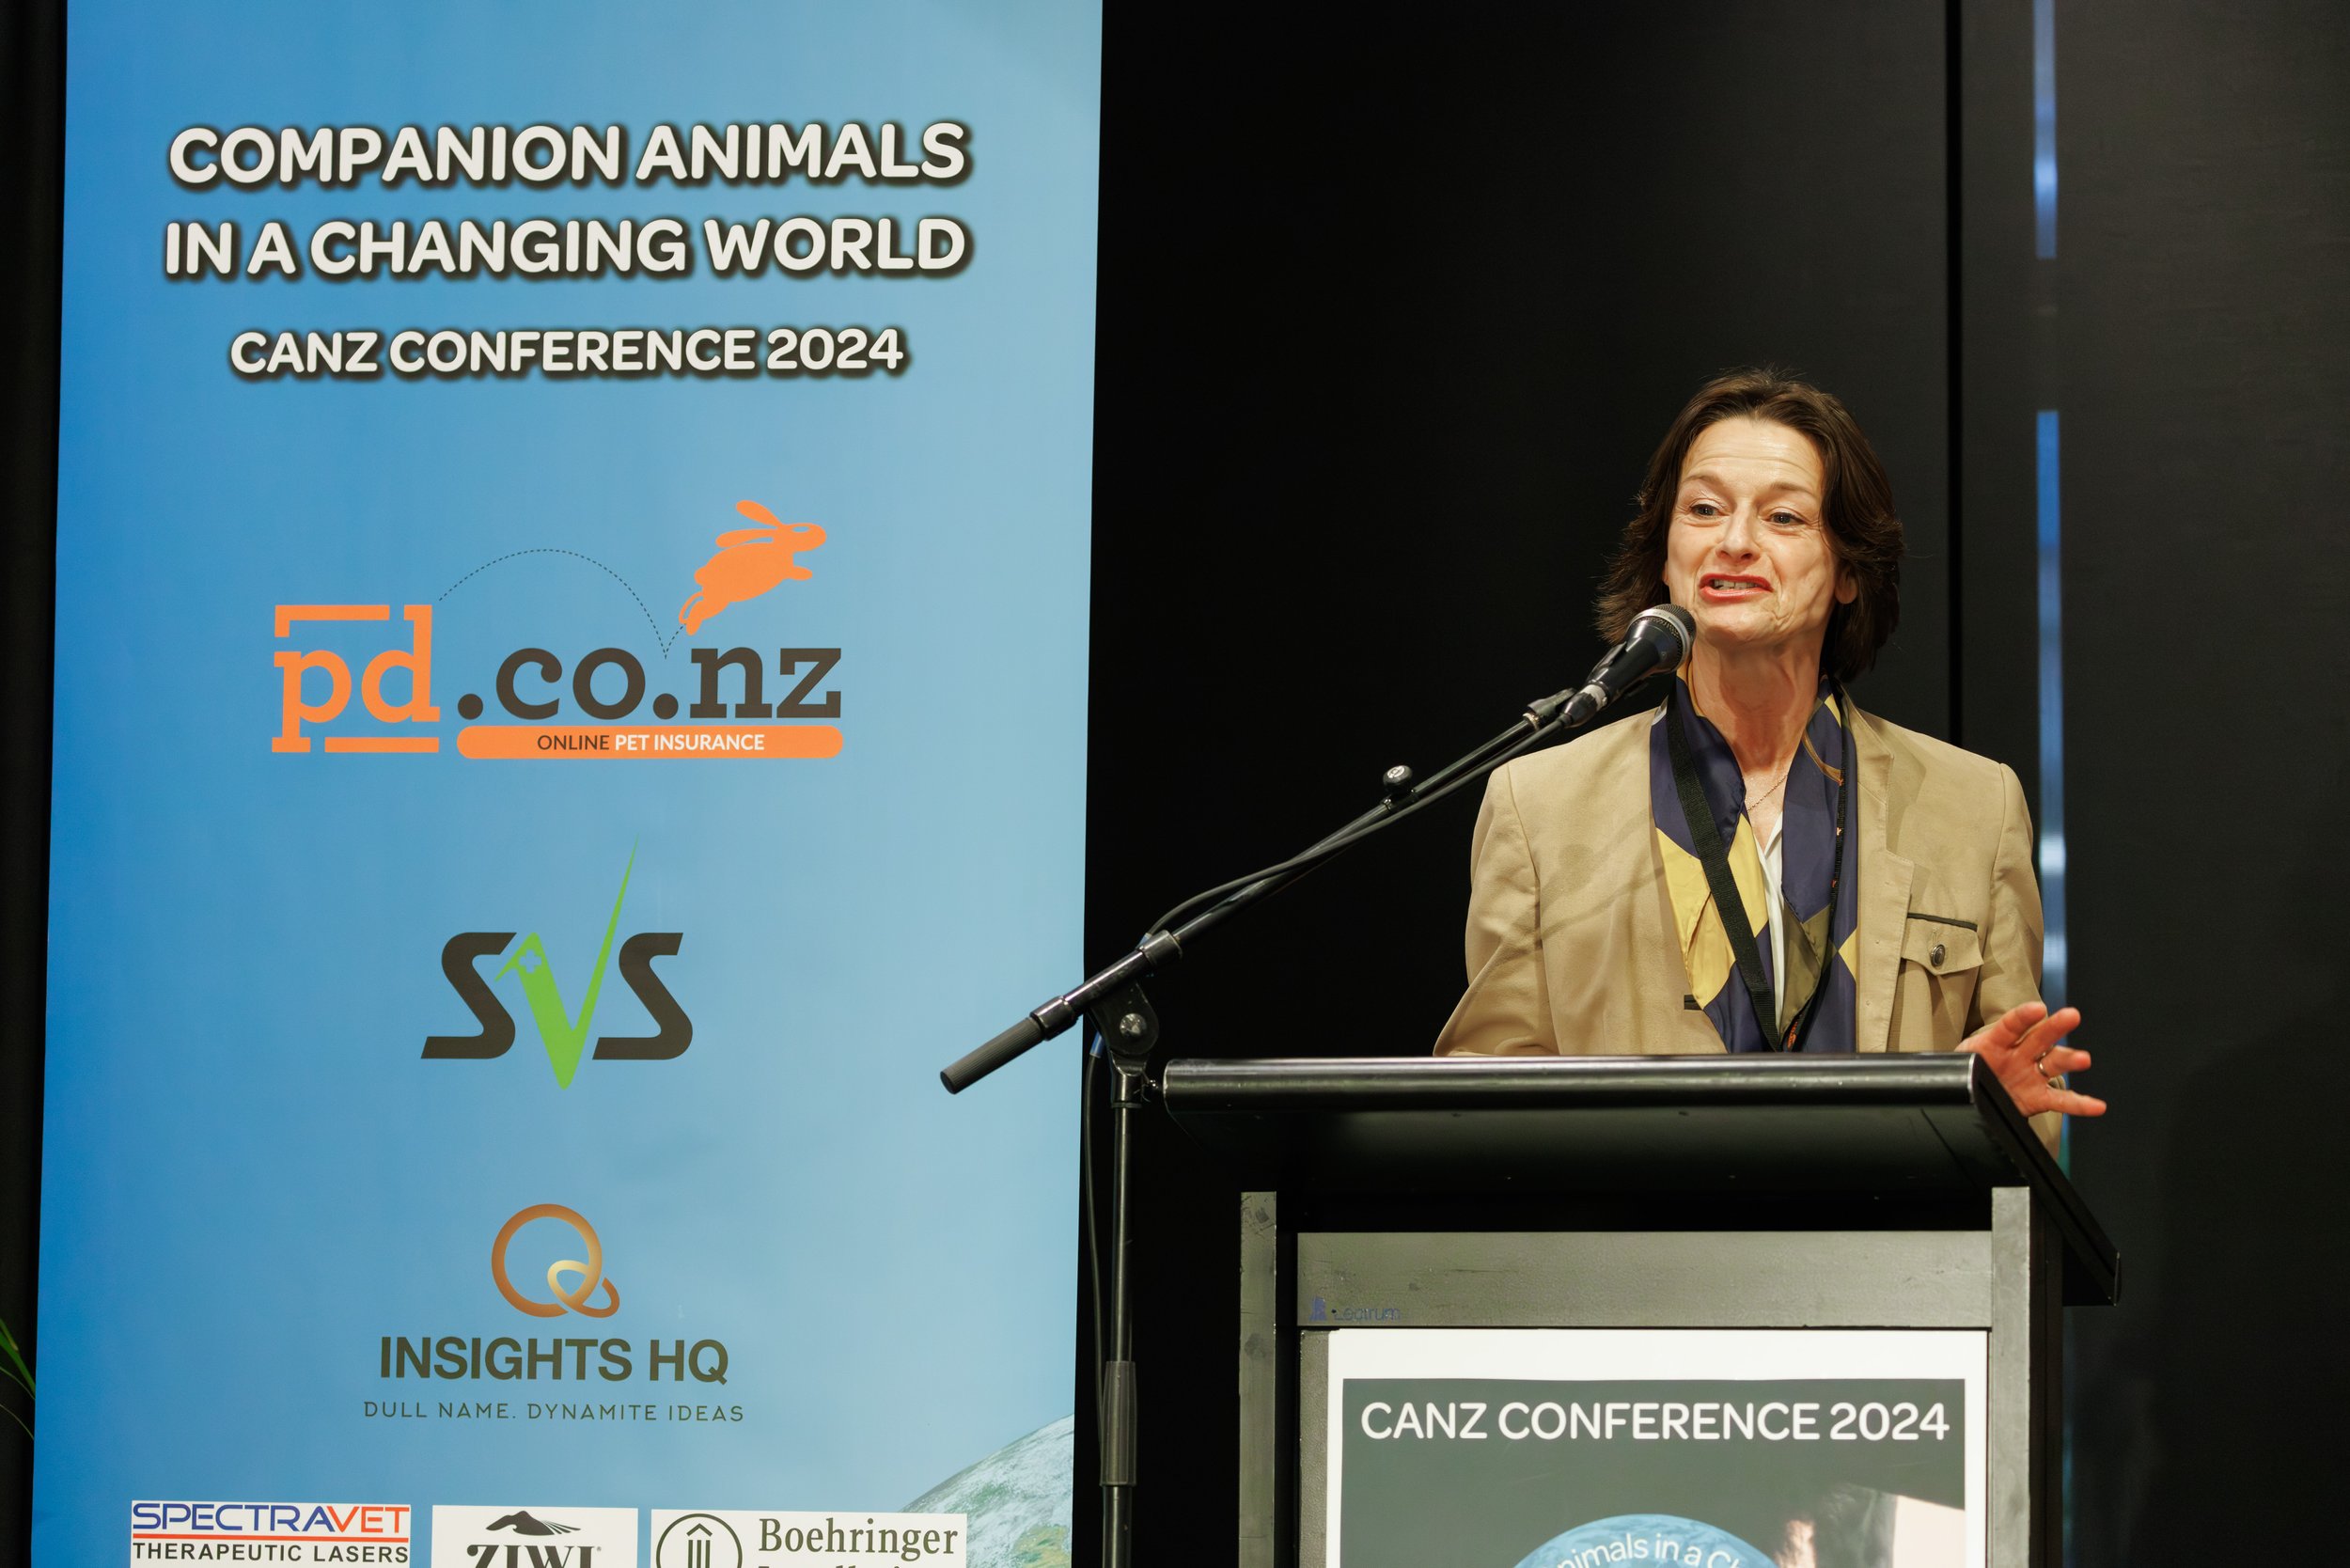 088_CANZ_Conference_12Mar2024.jpg